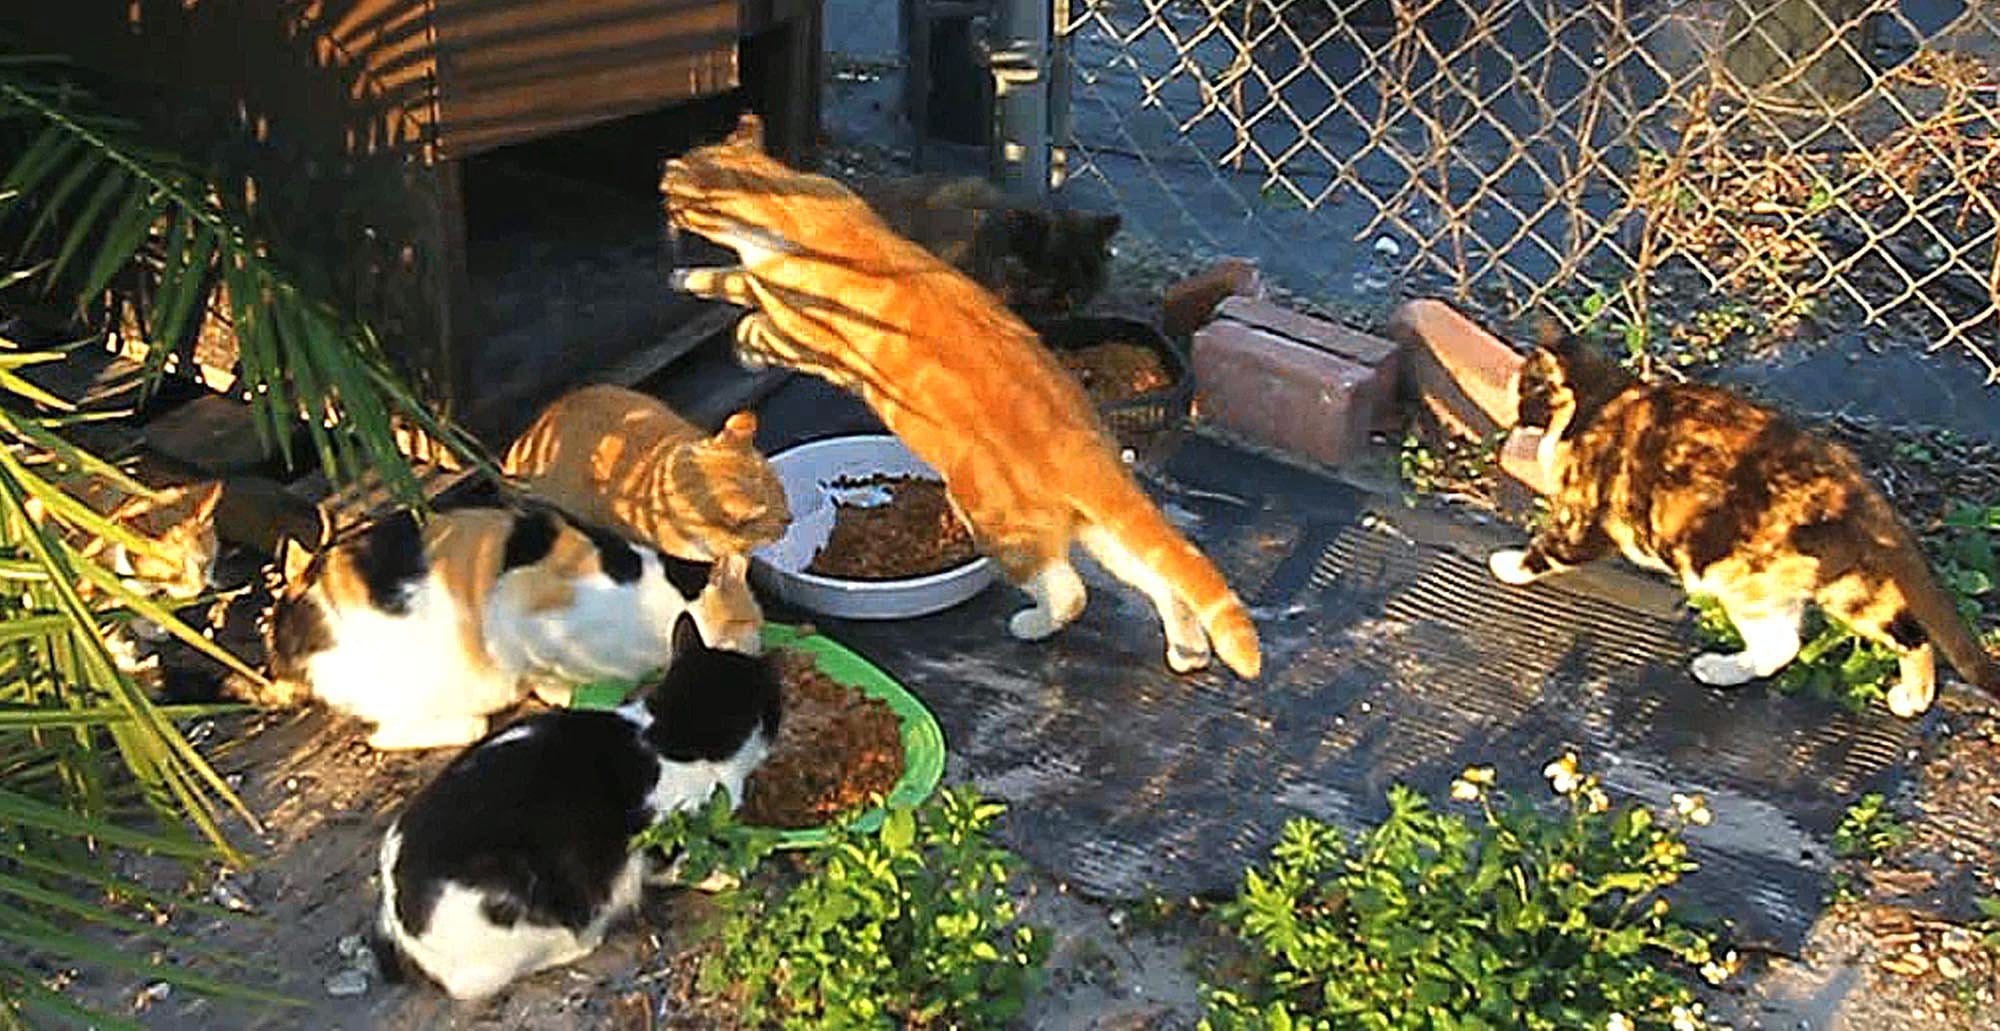 Several cats gather to eat food placed by Therese Marchelos at one of her feral cat shelters in Orlando, Fla.